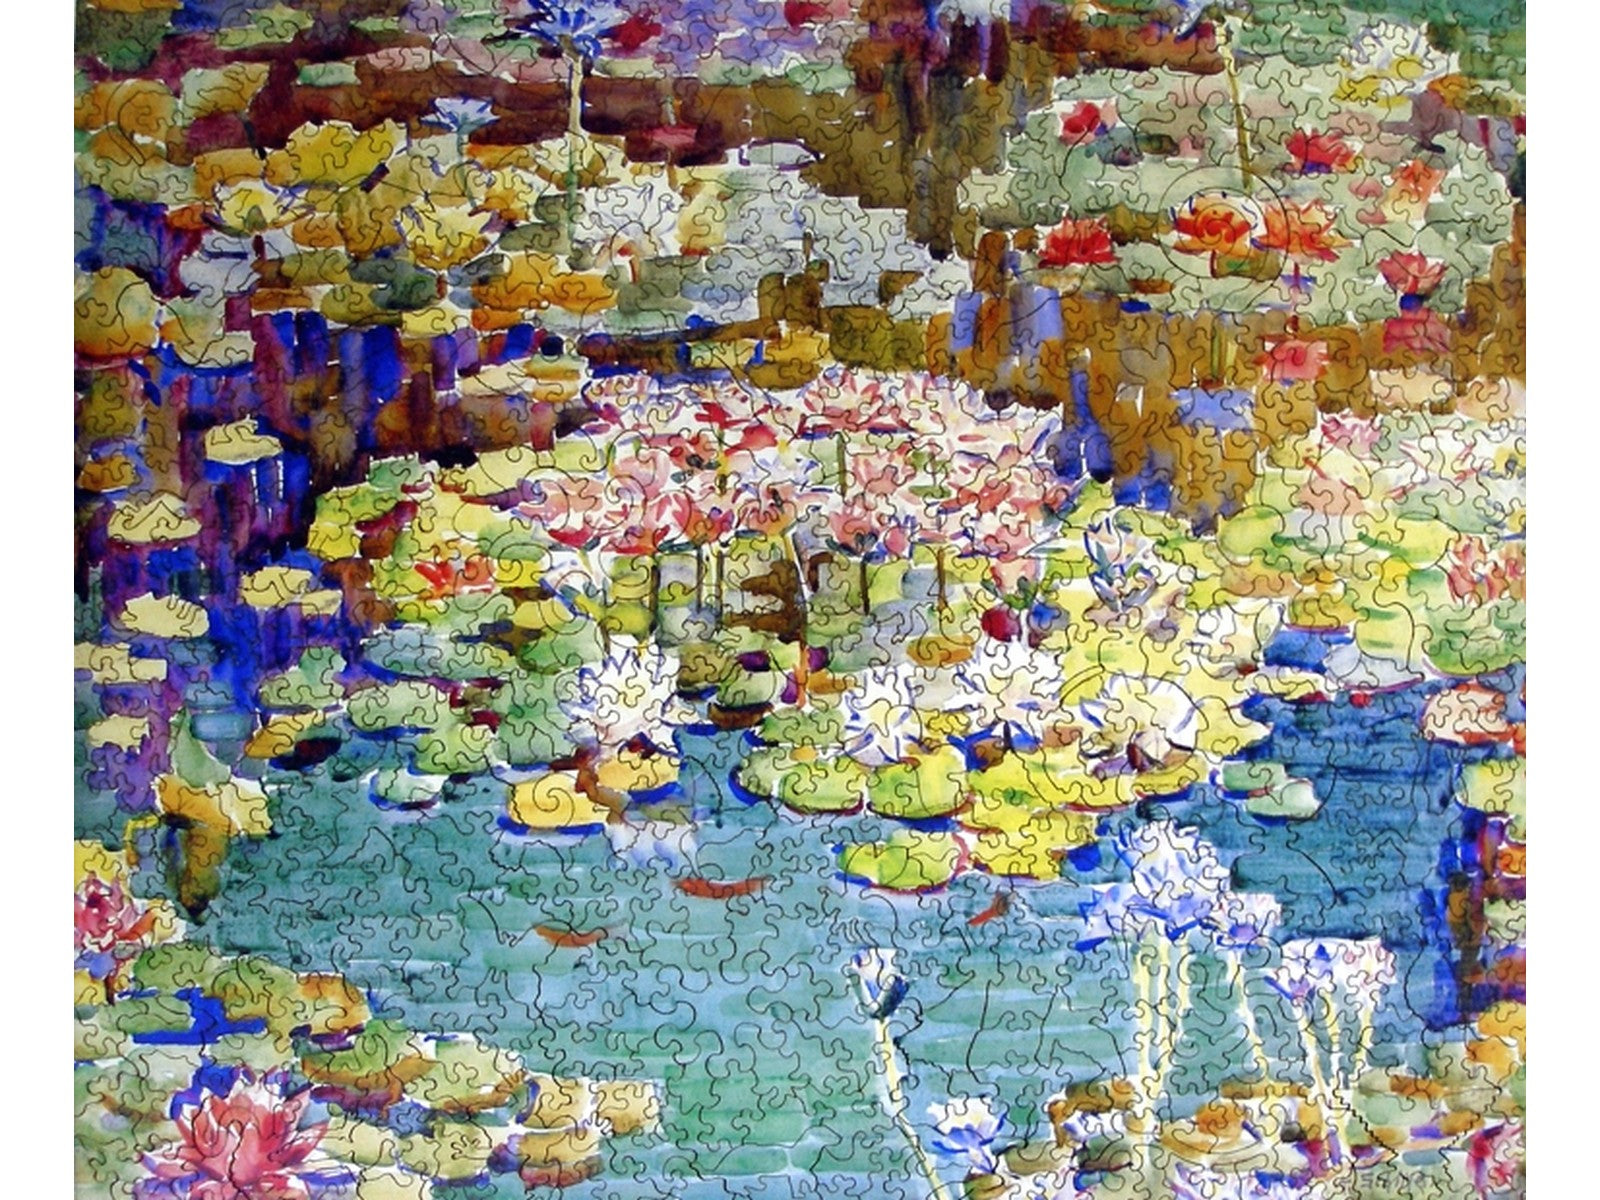 The front of the puzzle, Water Lilies, Schille, which shows a pond full of water lilies.